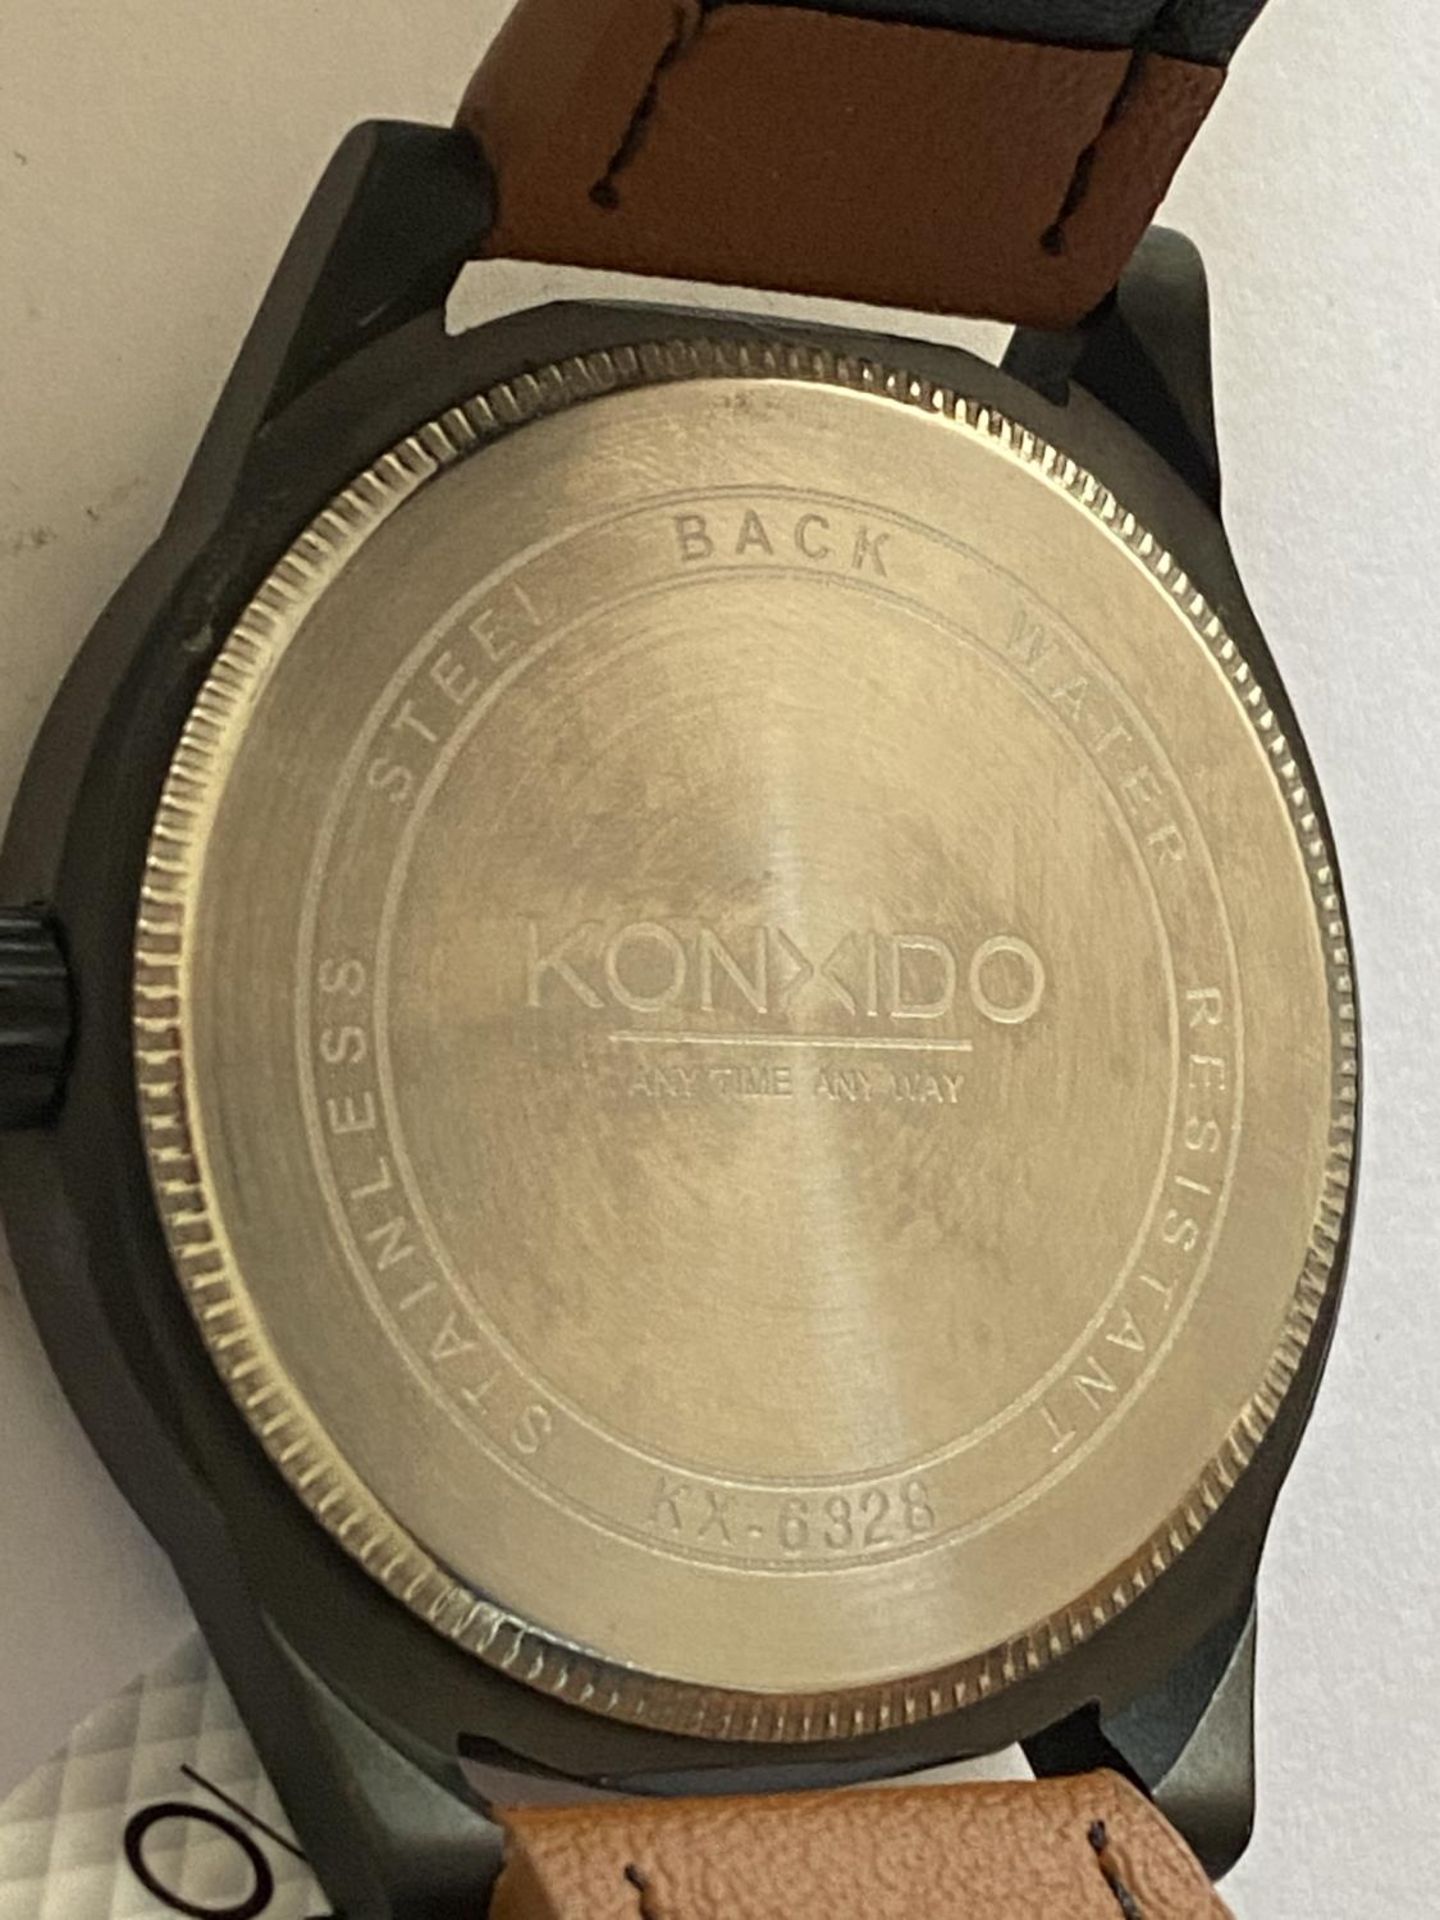 AN AS NEW AND BOXED KONXIDO WRISTWATCH - Image 4 of 4